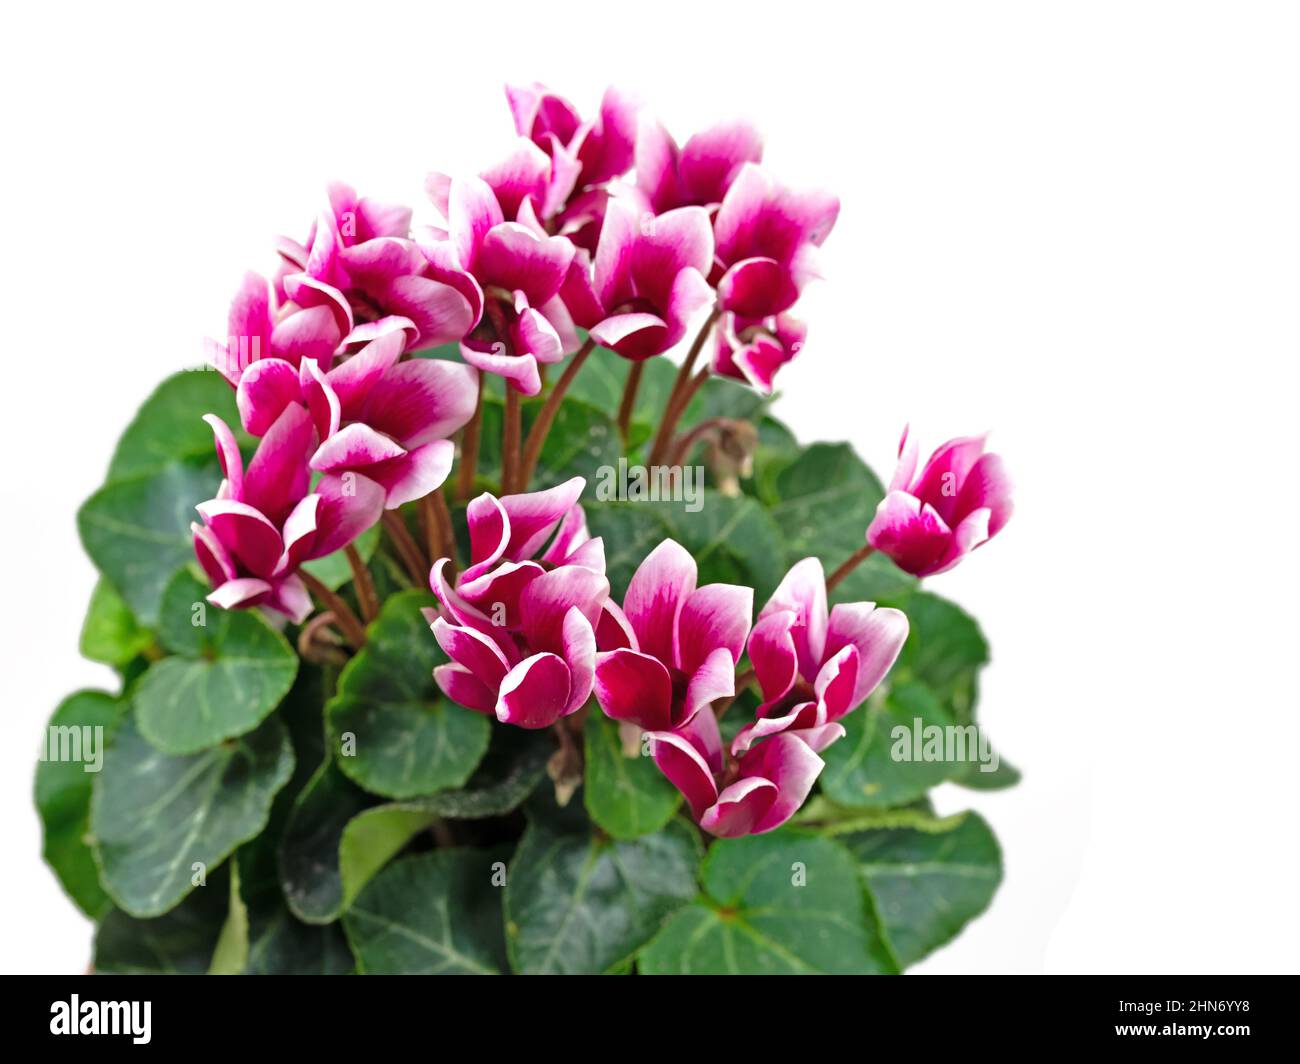 Cyclamen, Cyclamen persicum, isolated against white background Stock Photo